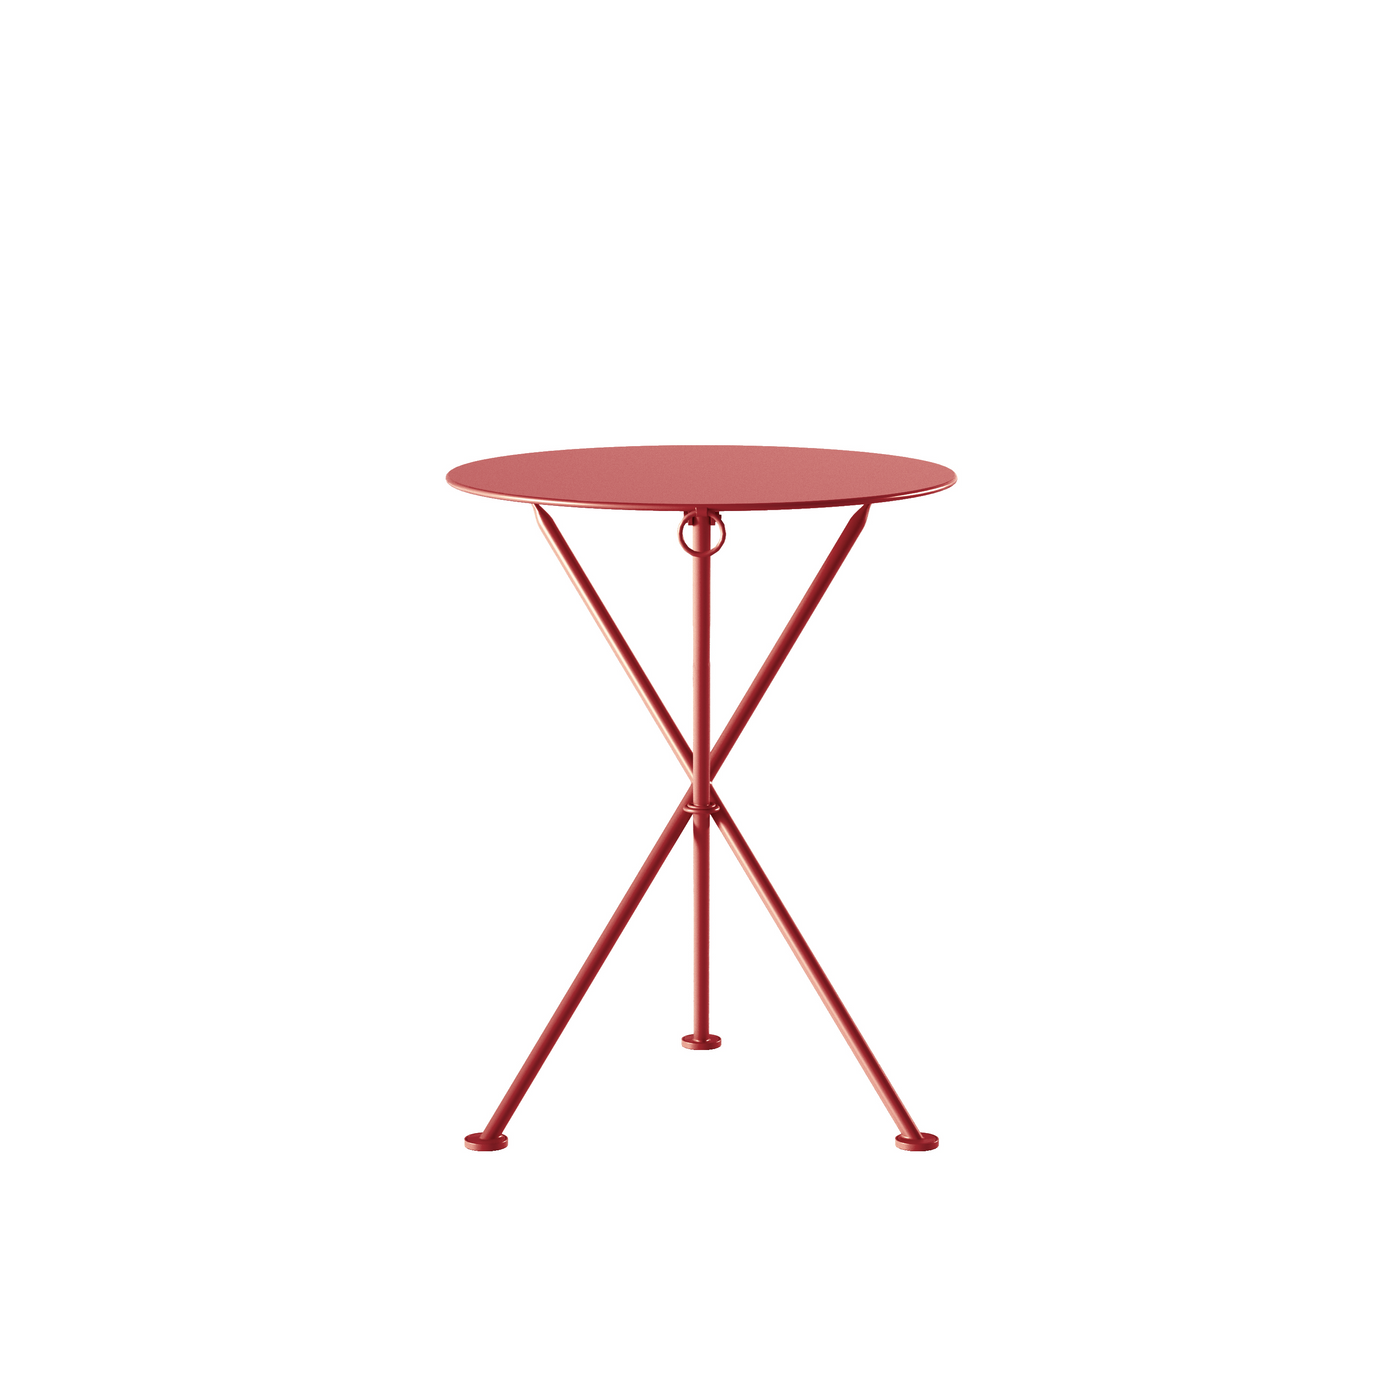 Bistro Foldable Garden / Patio Table, 2 Seater, Berry Red